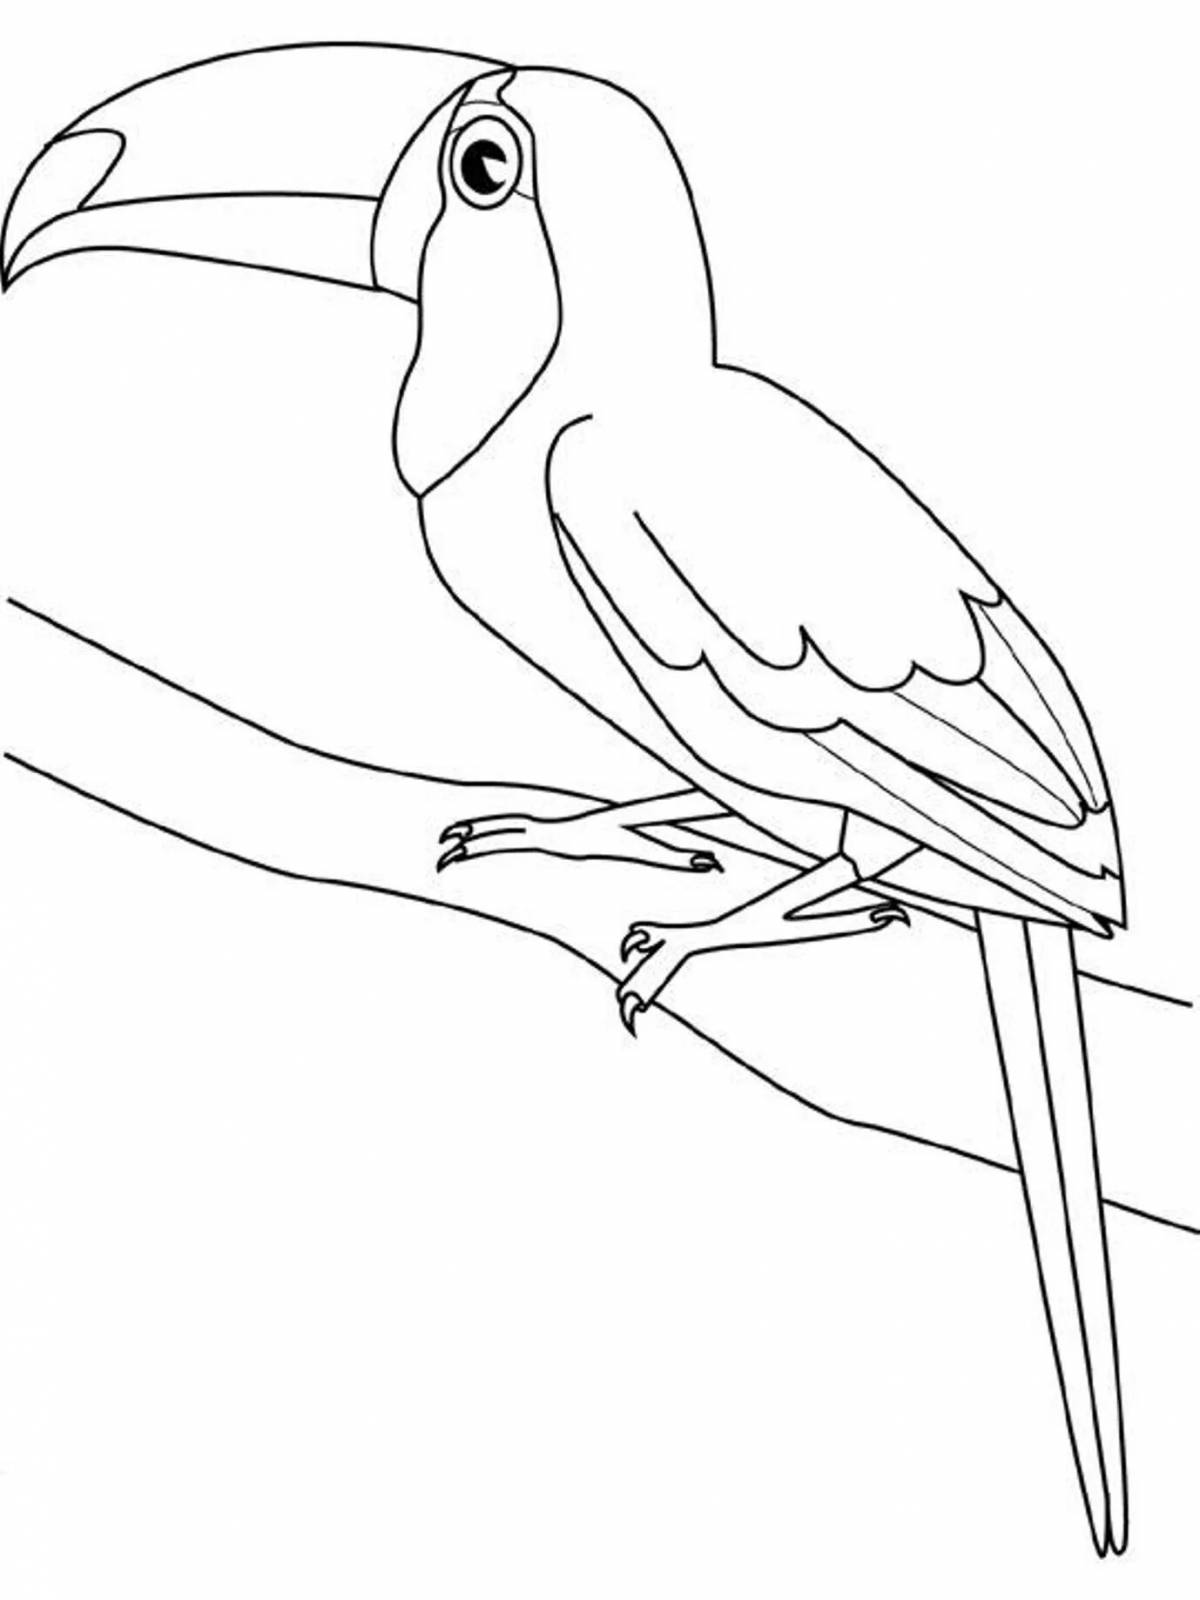 Glitter toucan coloring book for kids